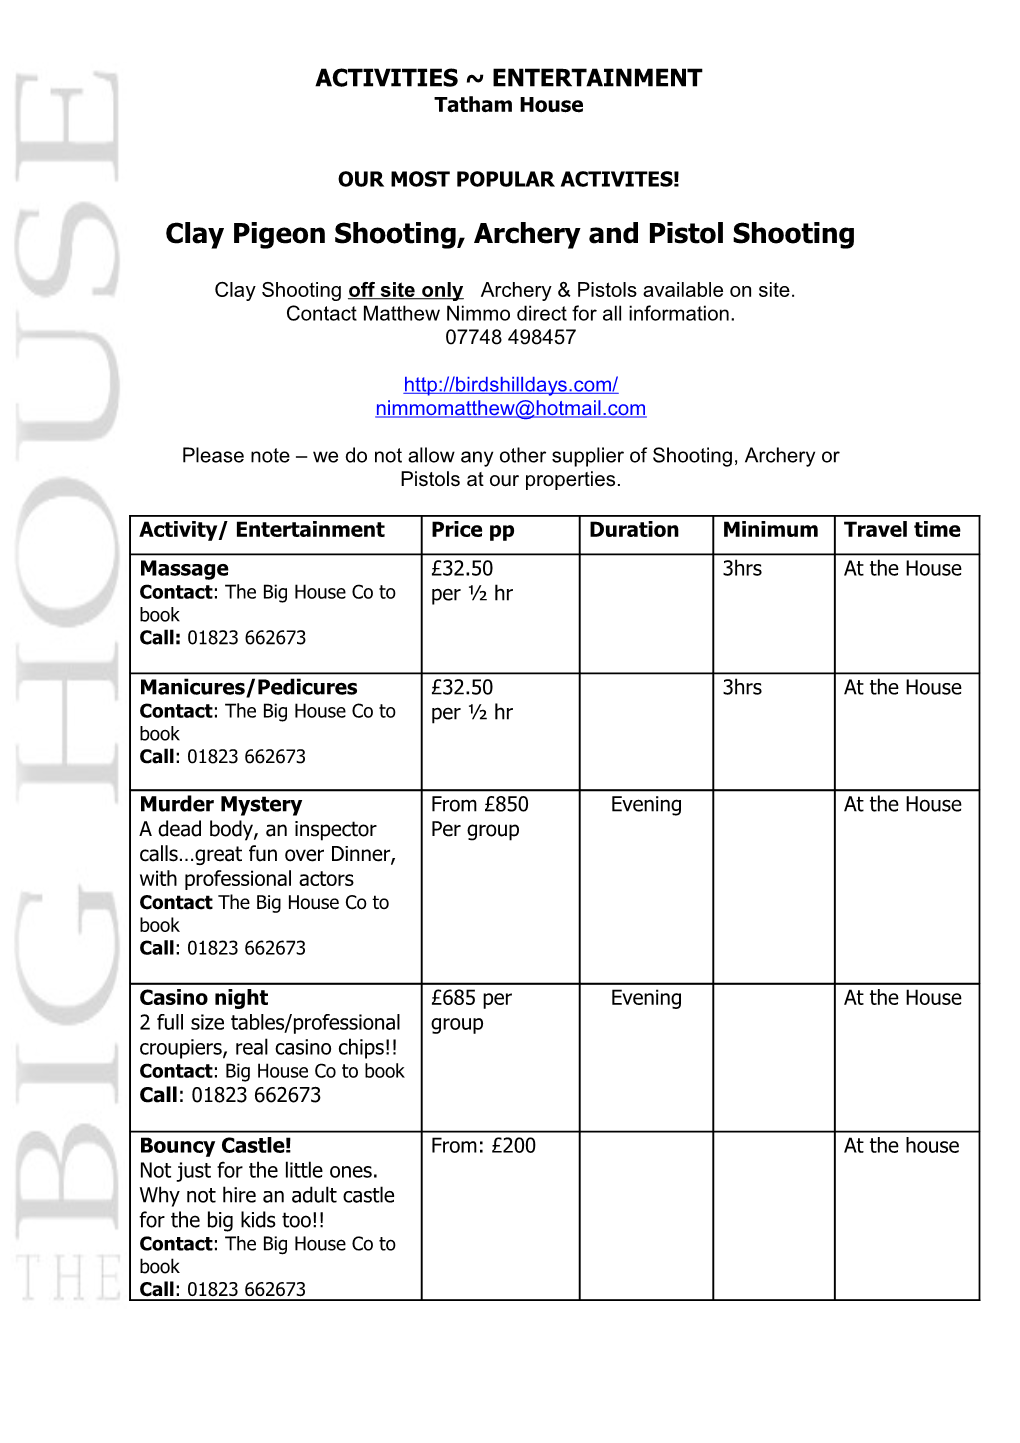 Clay Pigeon Shooting, Archery and Pistol Shooting